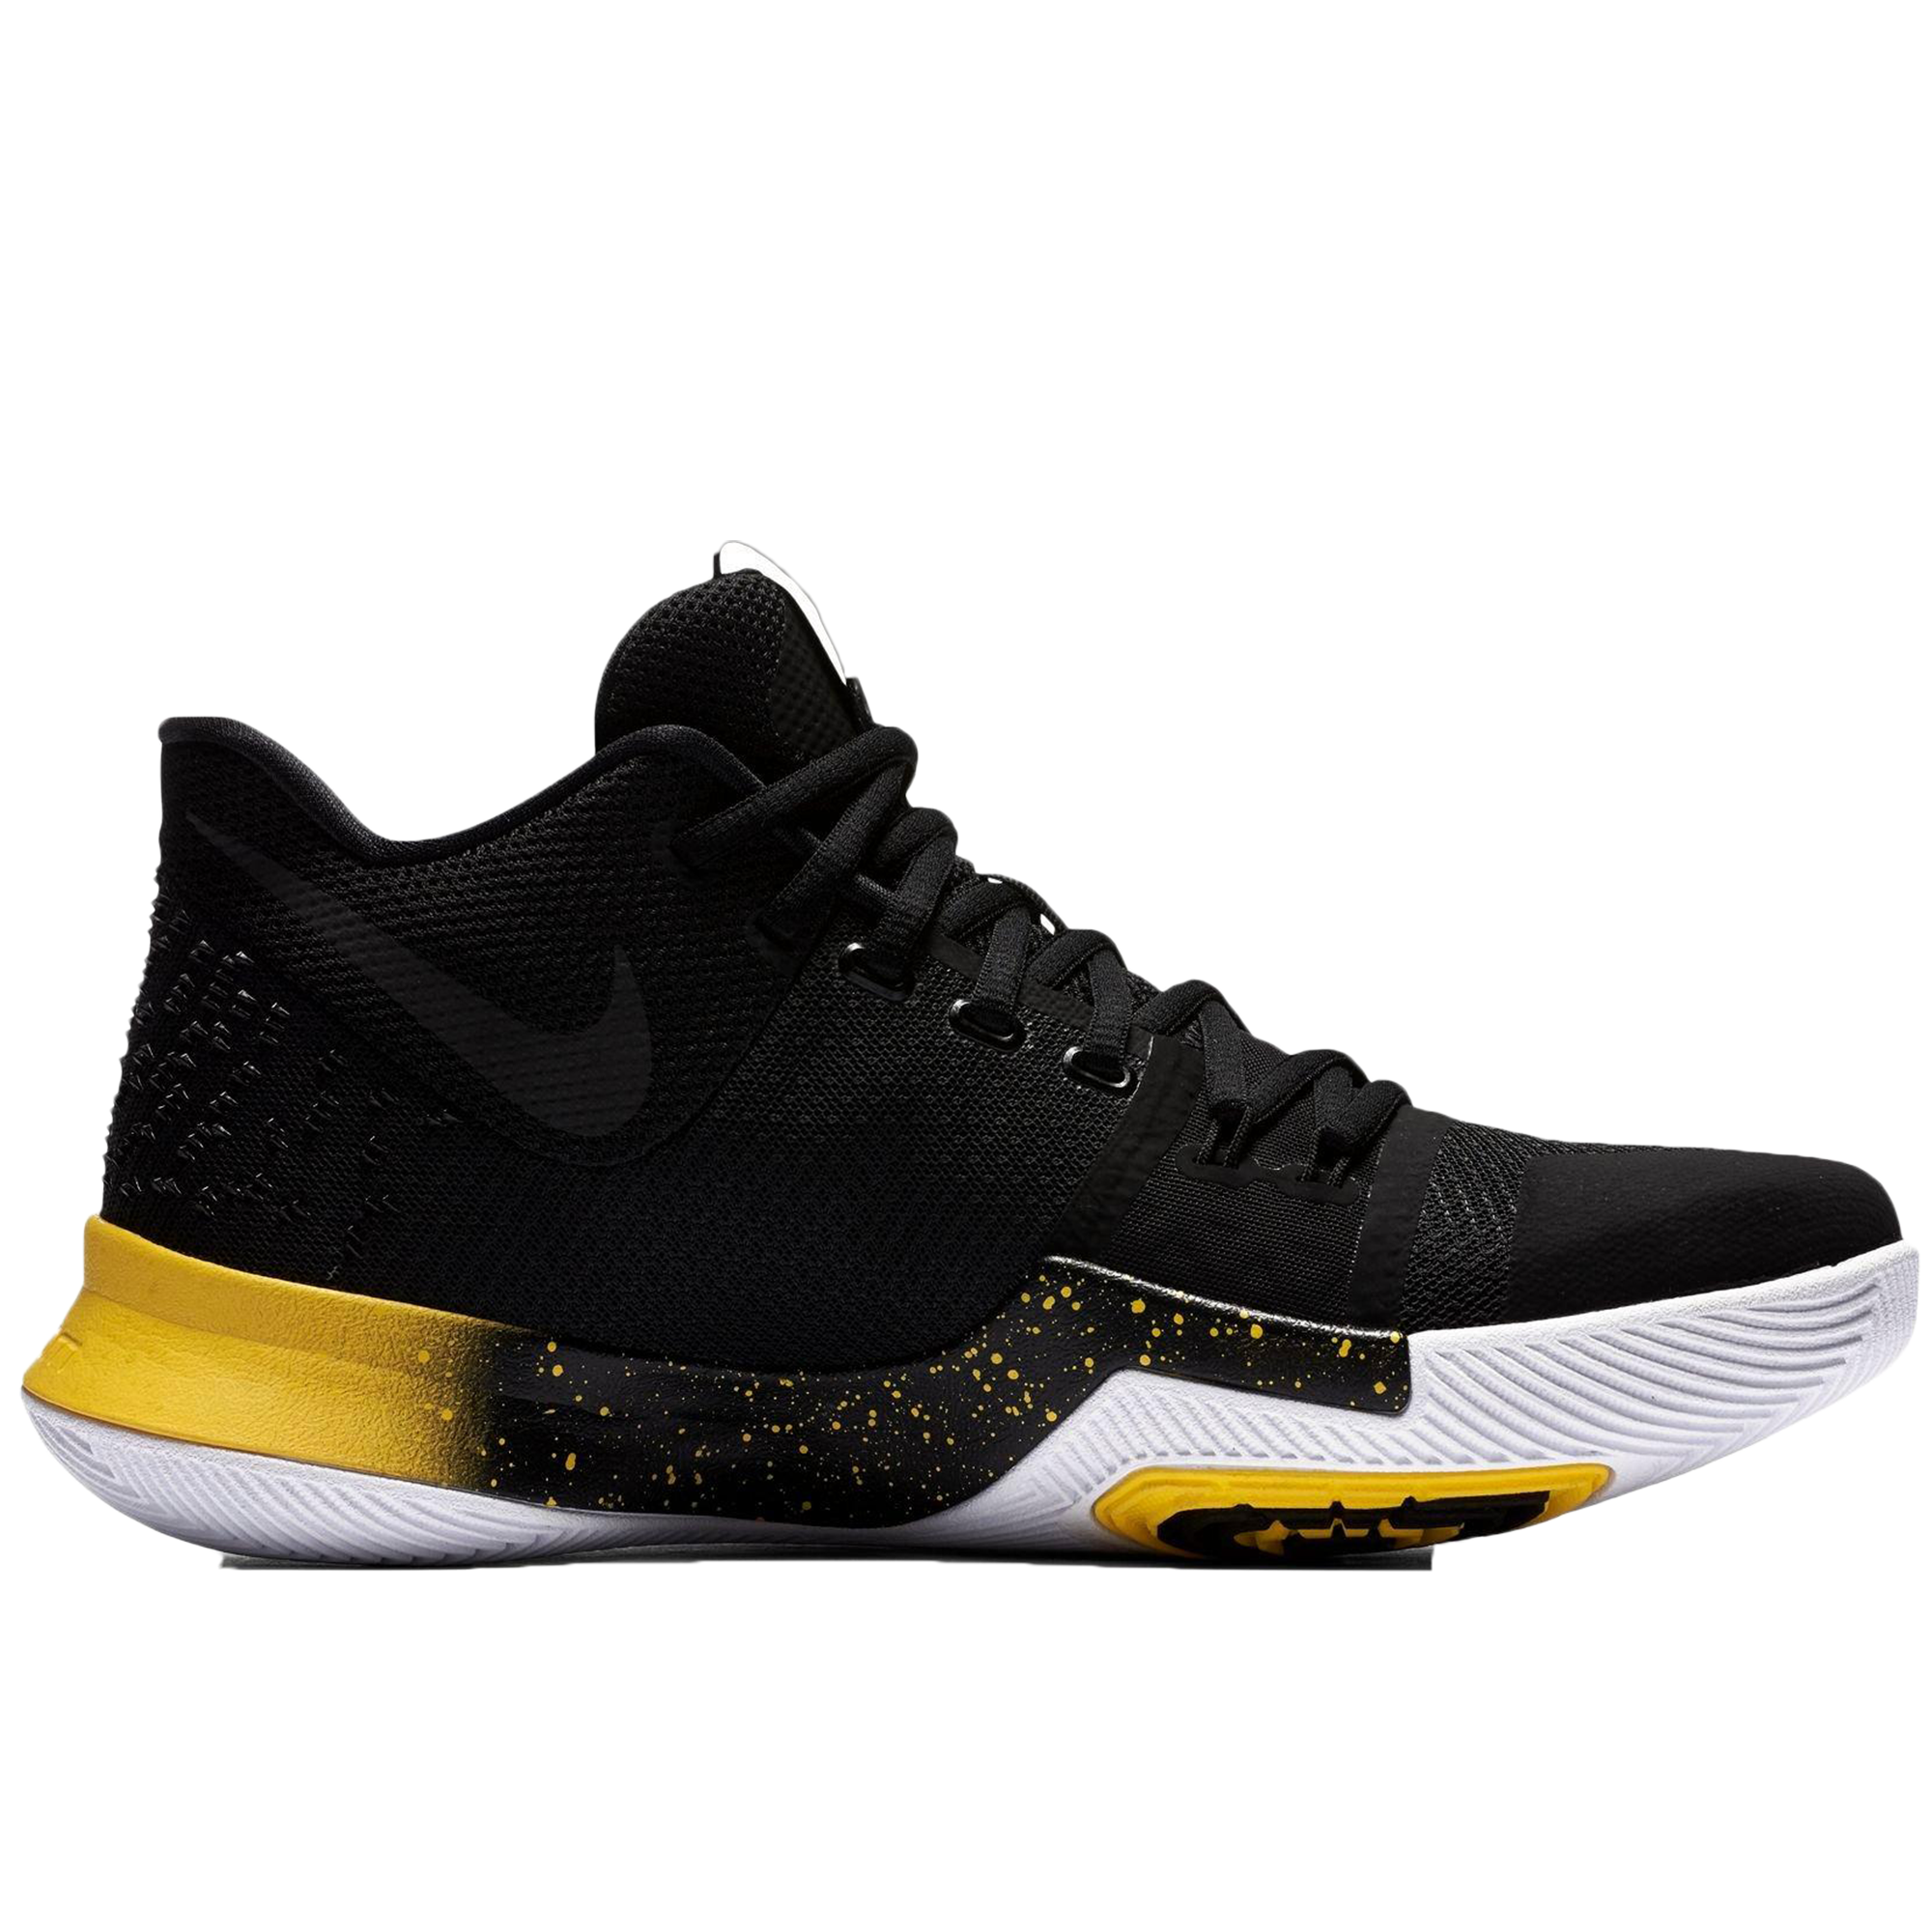 kyrie 3s shoes